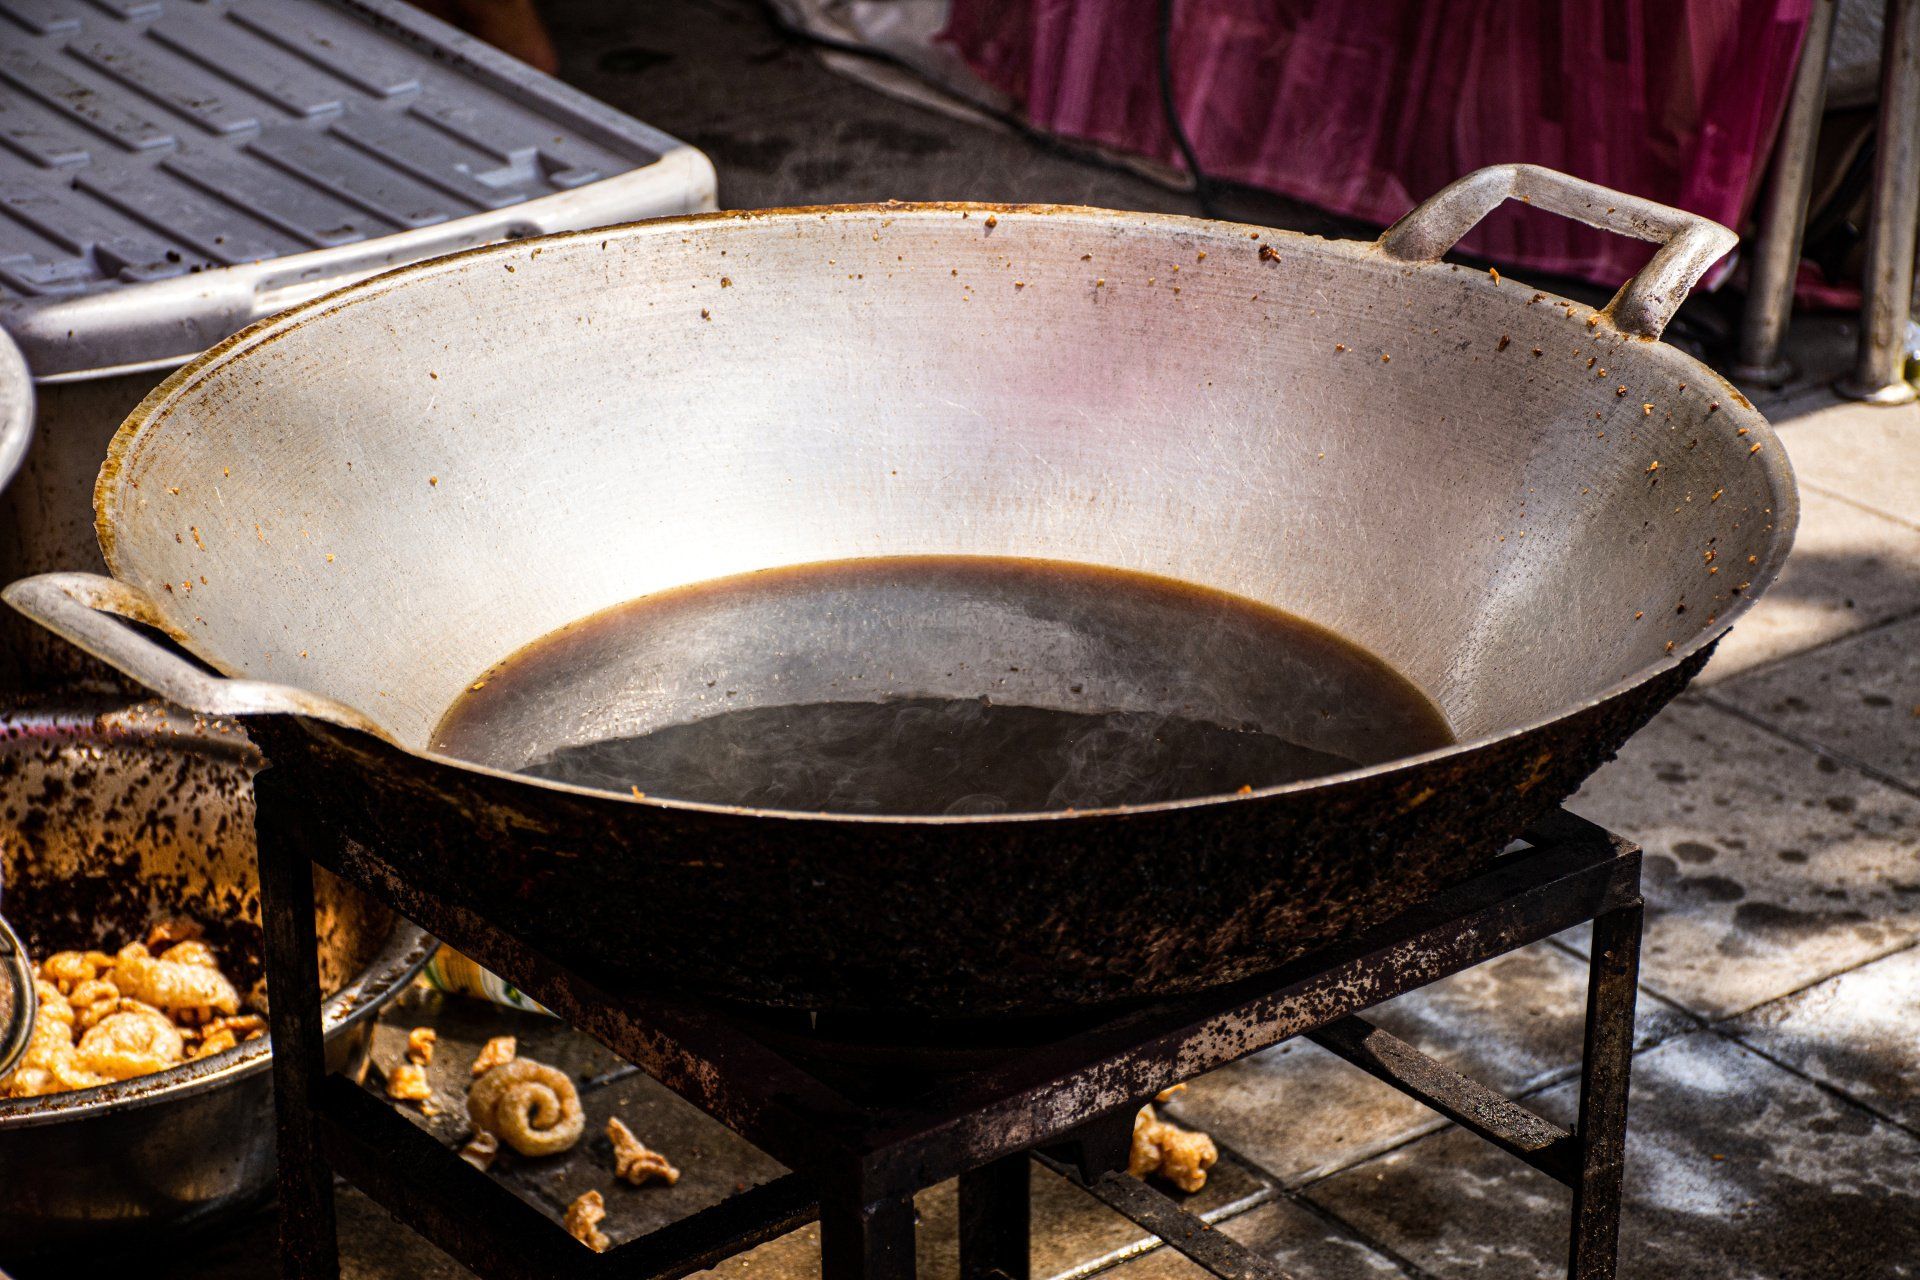 dirty oil in a wok on the street